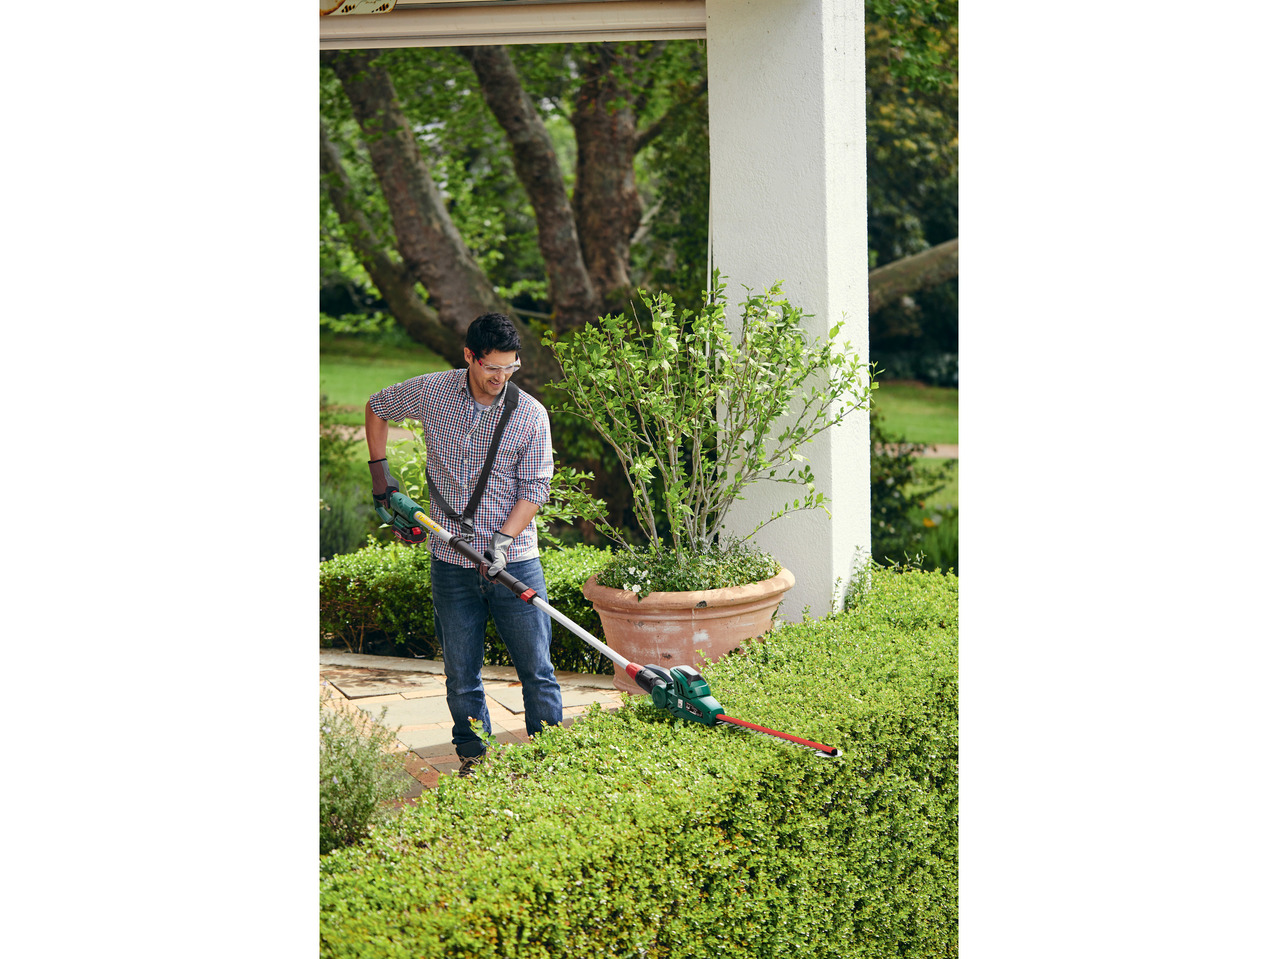 Cordless Extendable Hedge Trimmer